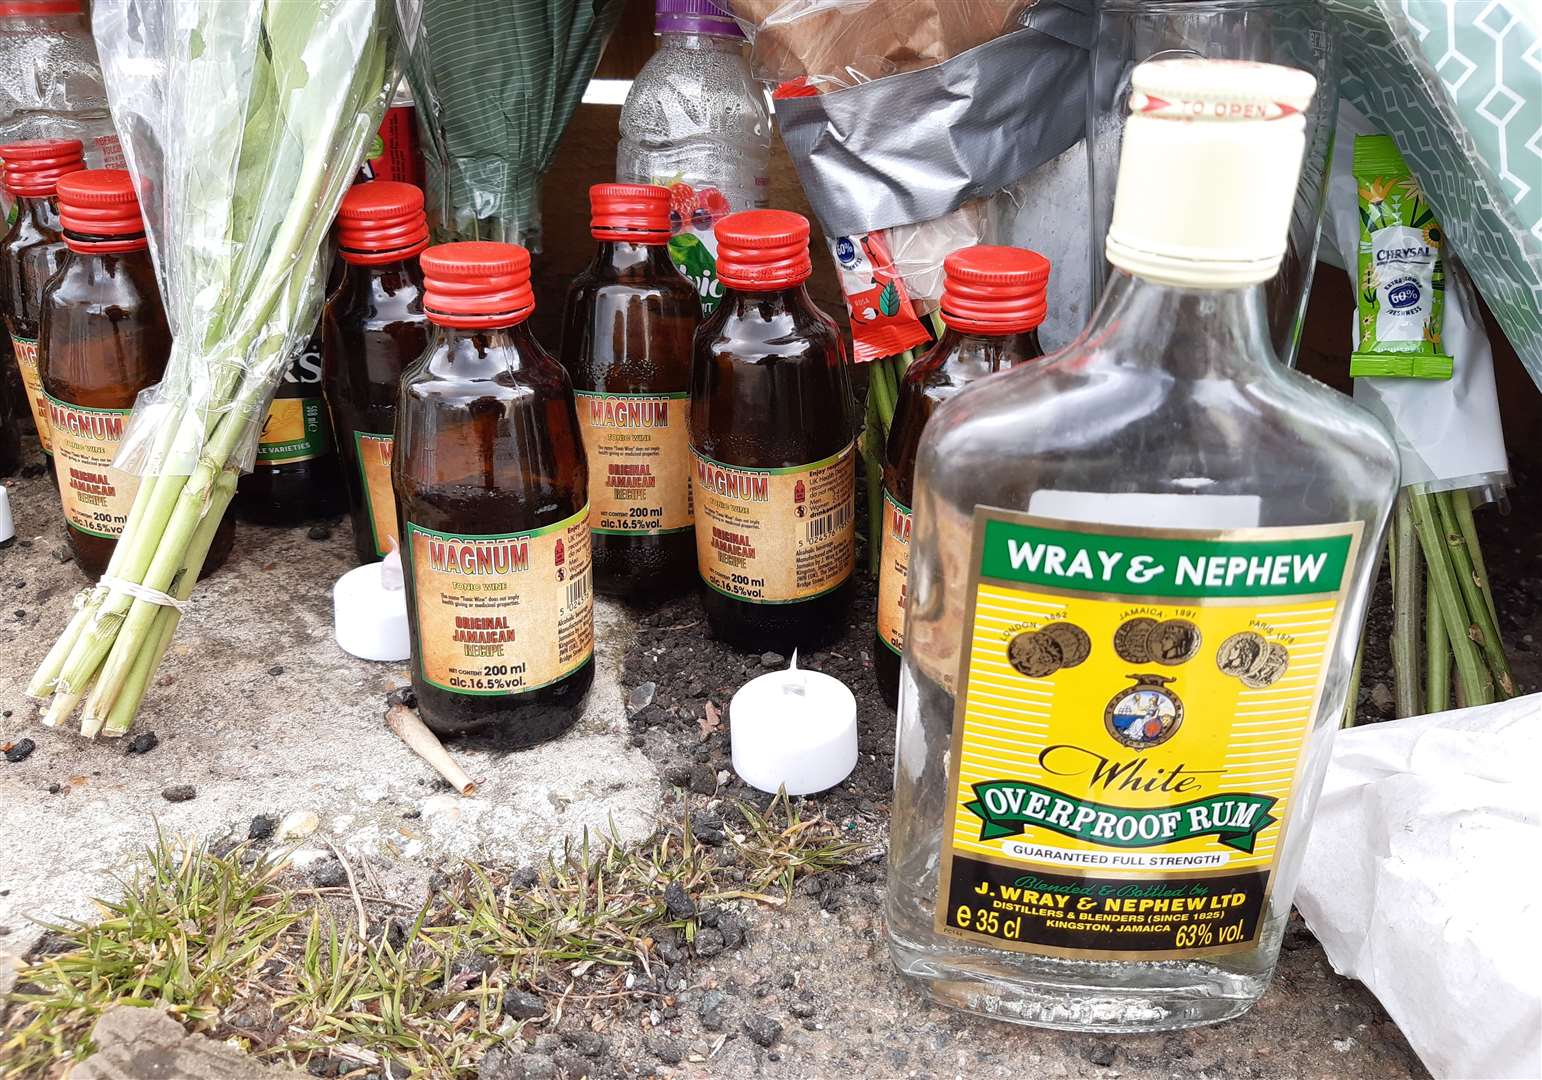 Bottles of rum and tonic wine have been left in Hunter Road